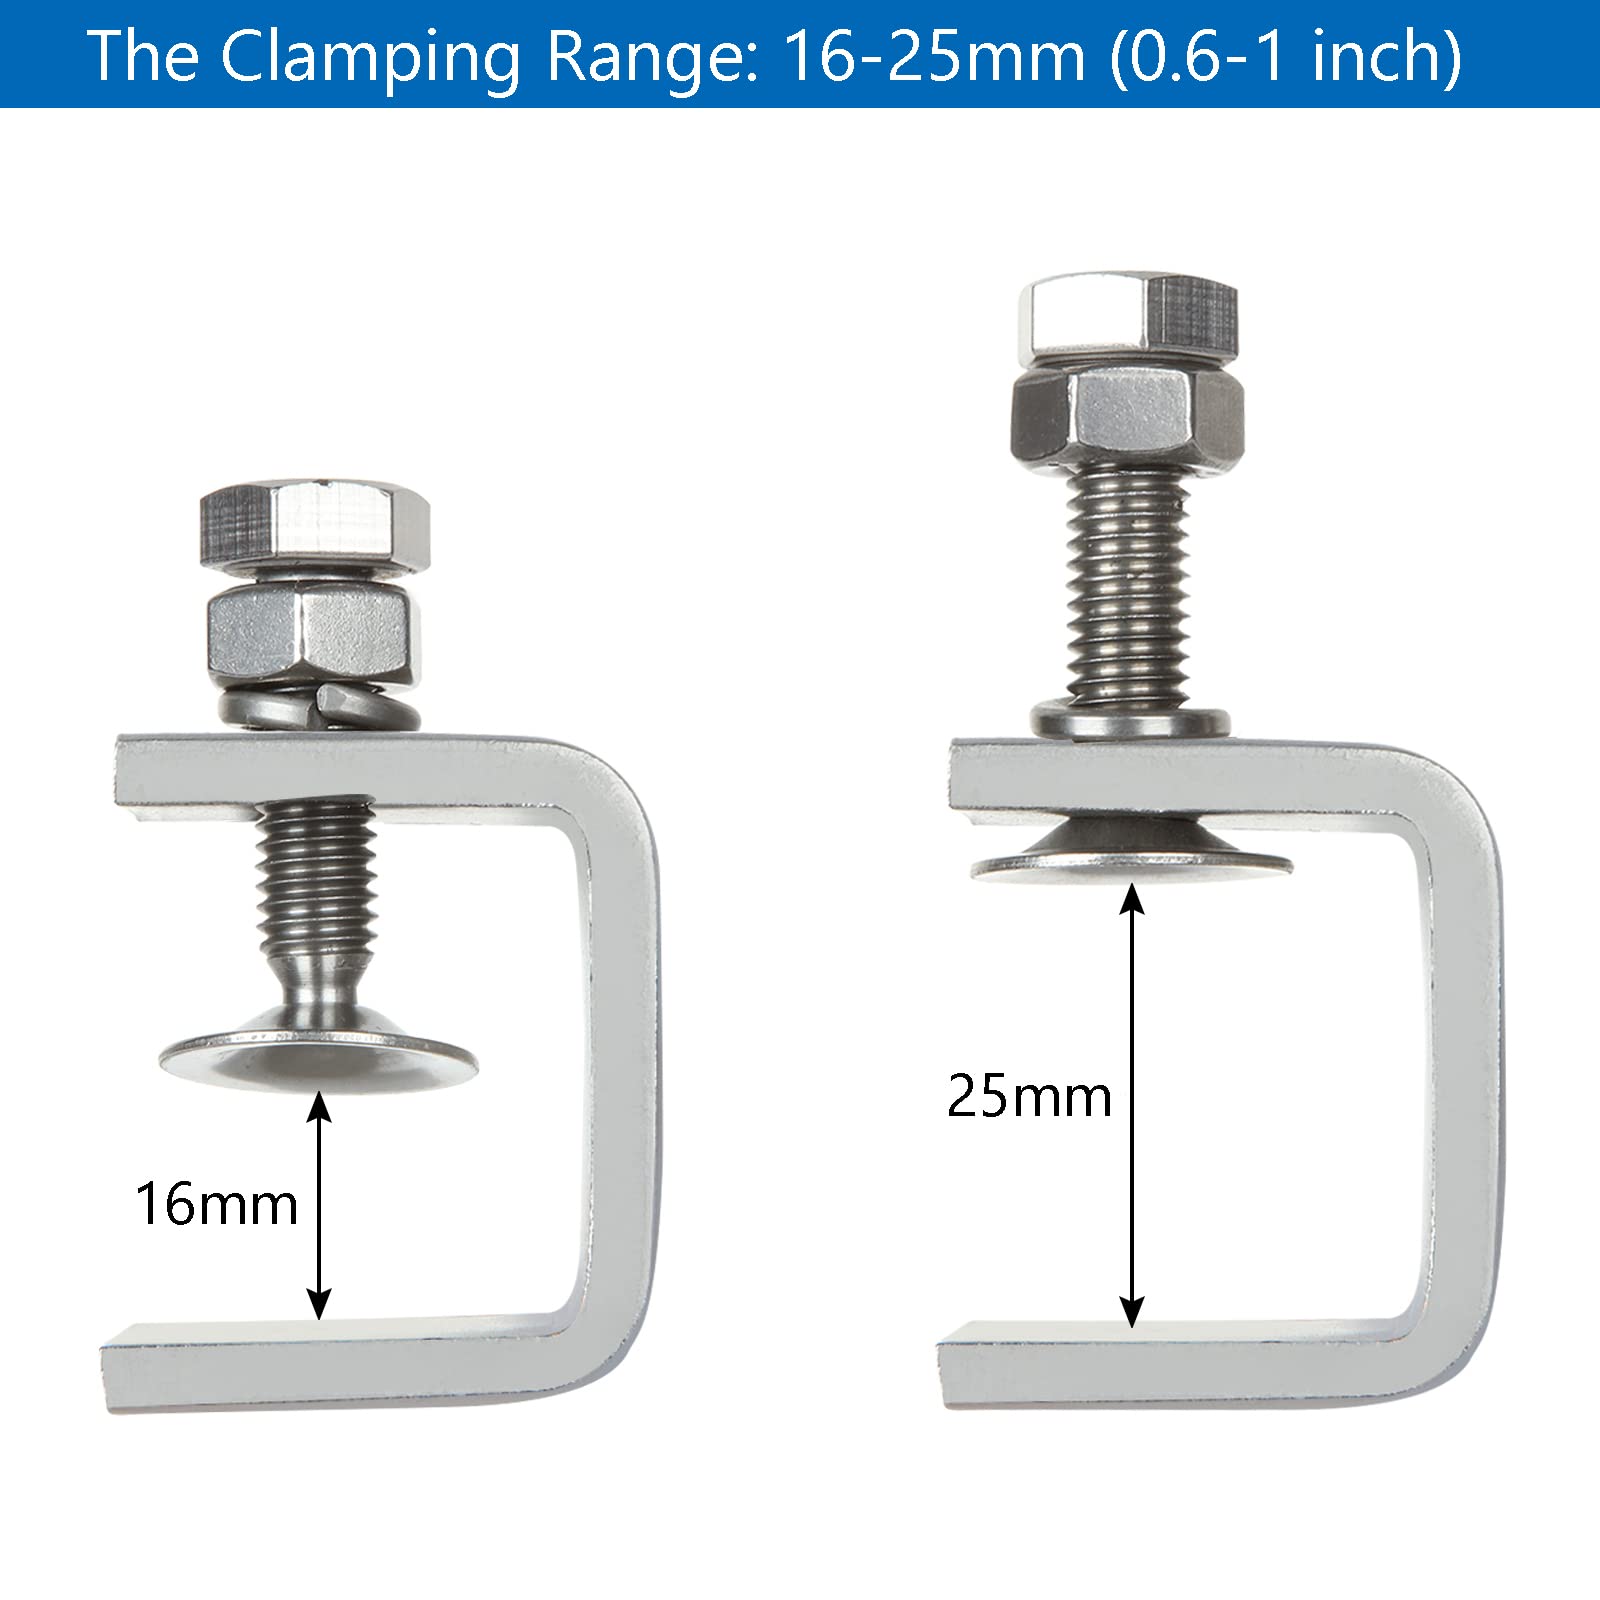 FVIEXE Small C Clamps, Heavy Duty C-Clamp 304 Stainless Steel with Stable Wide Jaw Opening & I Beam Design, Mini 1 Inch C Clamp, Desk Woodworking Clamp Tiger Clamp, Clamping Range 16-25mm